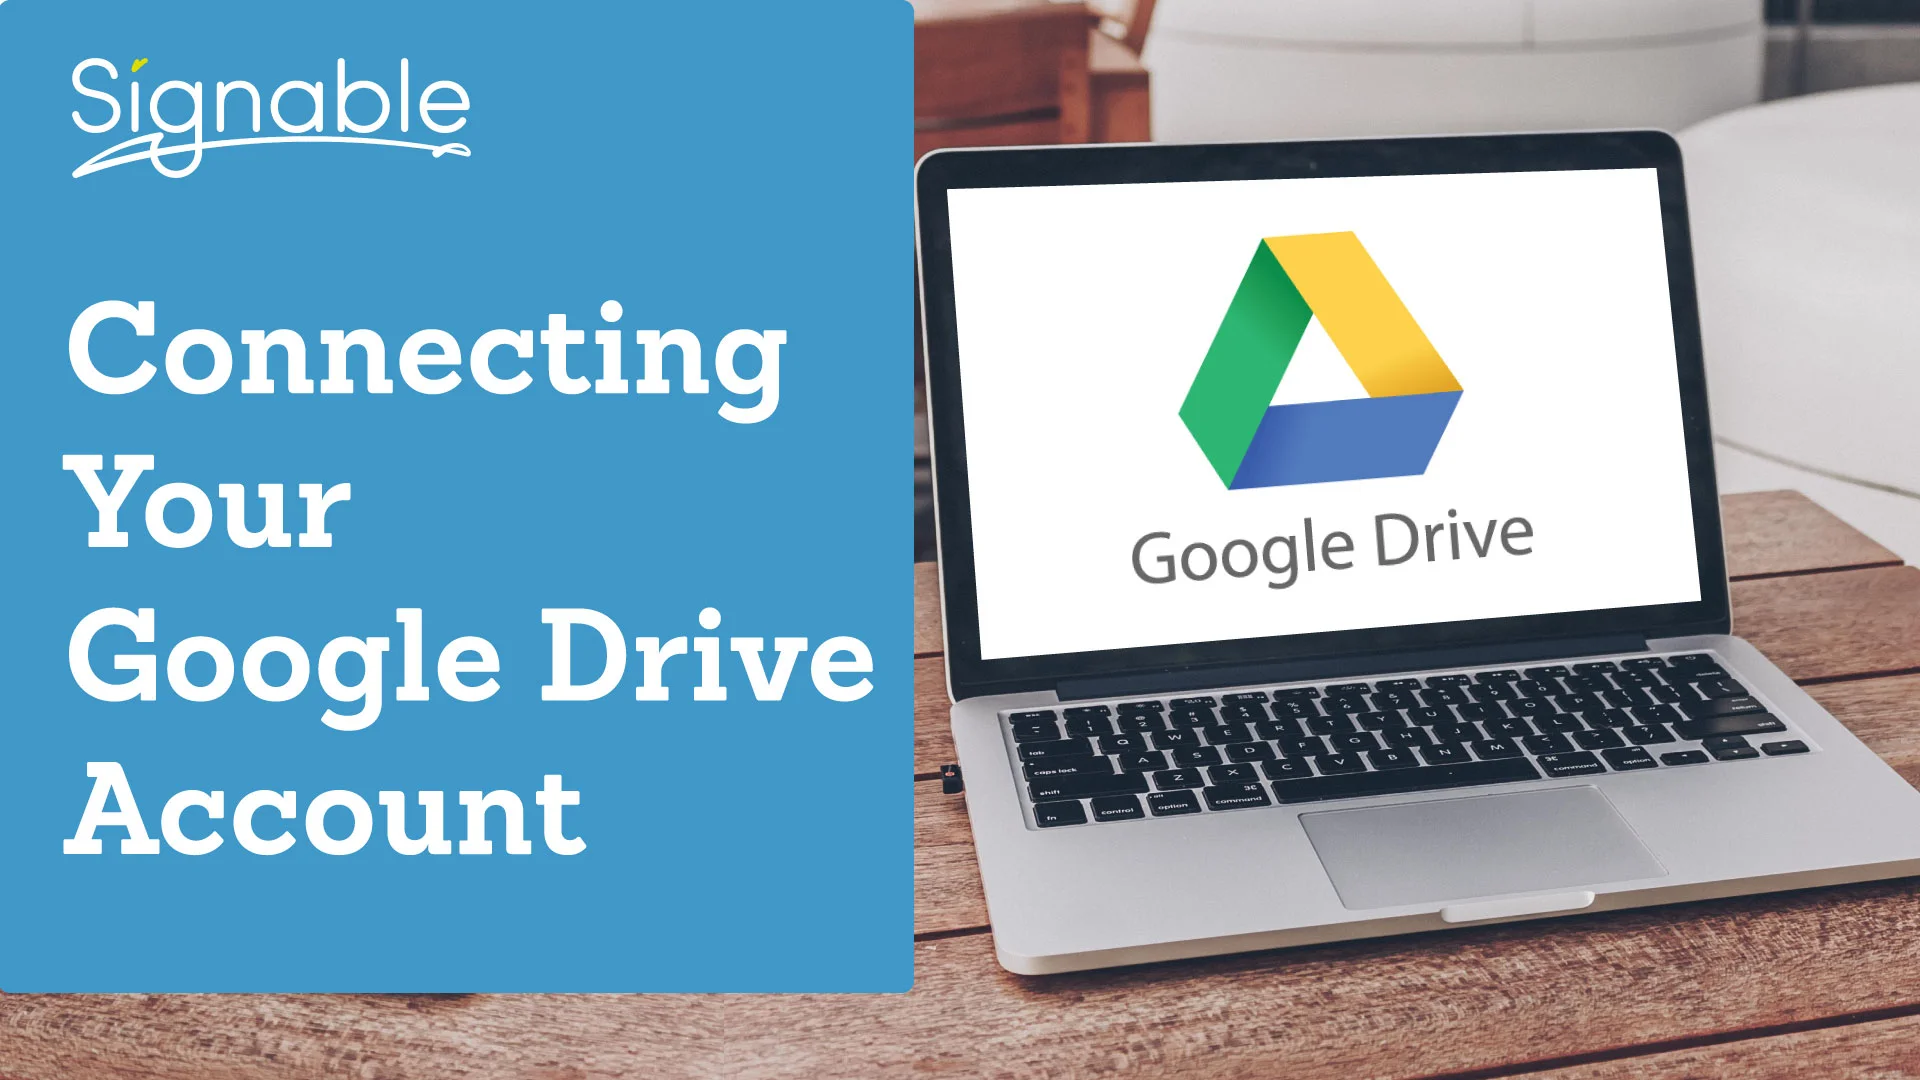 The Signable Google Drive Integration is here! - Signable